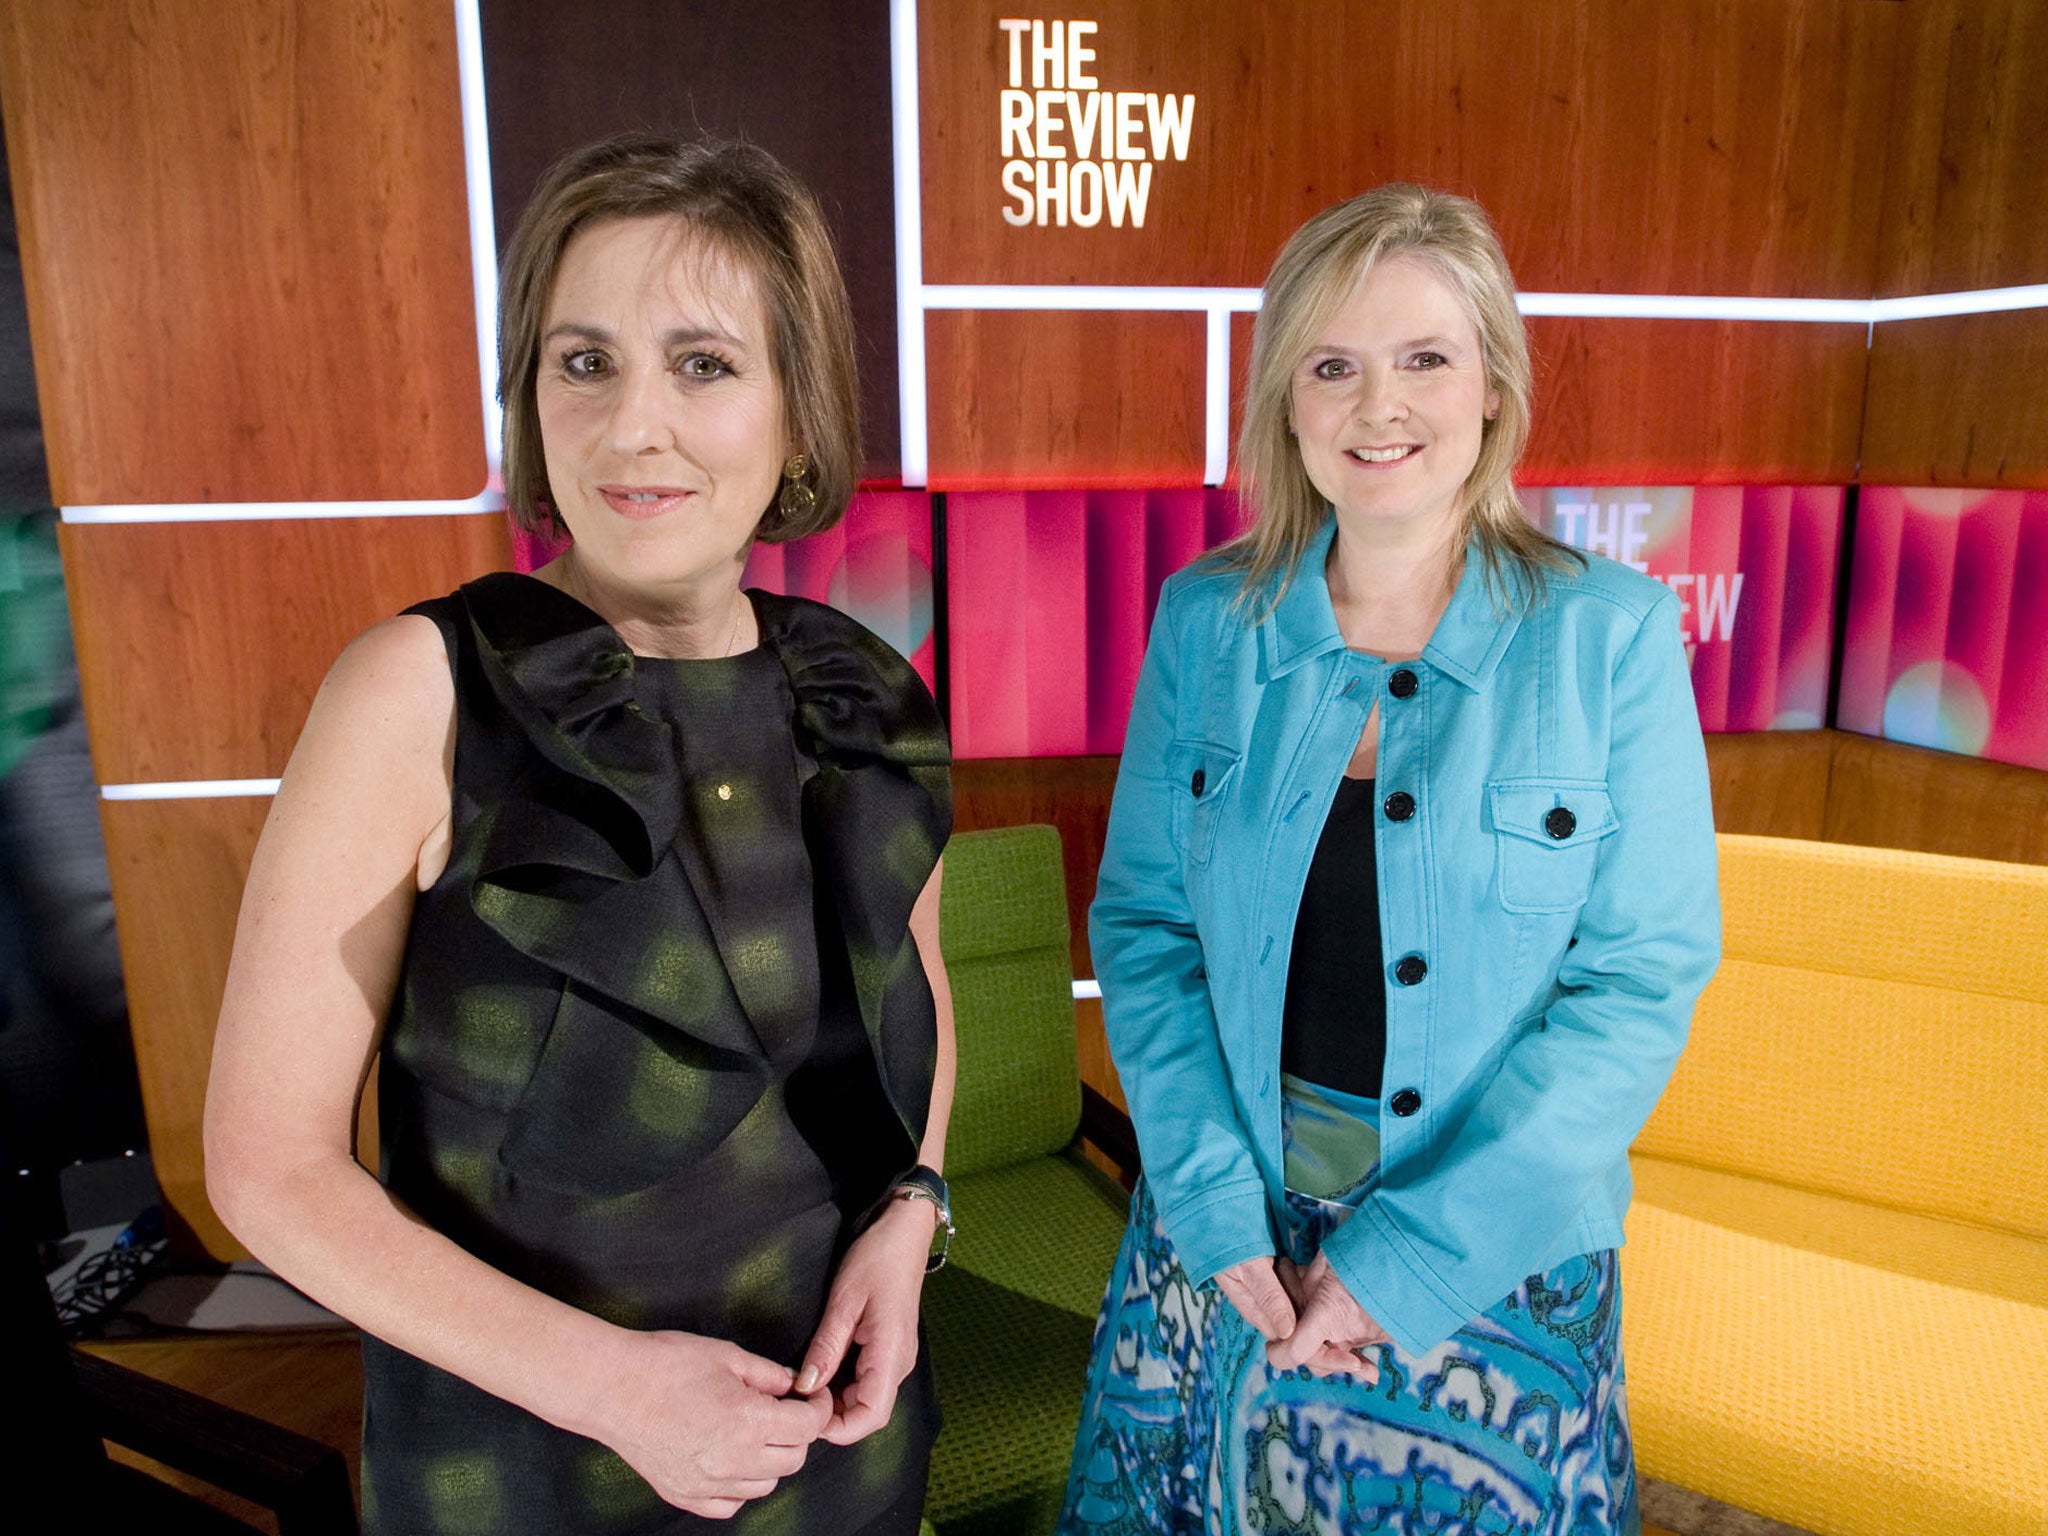 Last hurrah: Kirsty Wark and Martha Kearney, the presenters of ‘The Review Show’